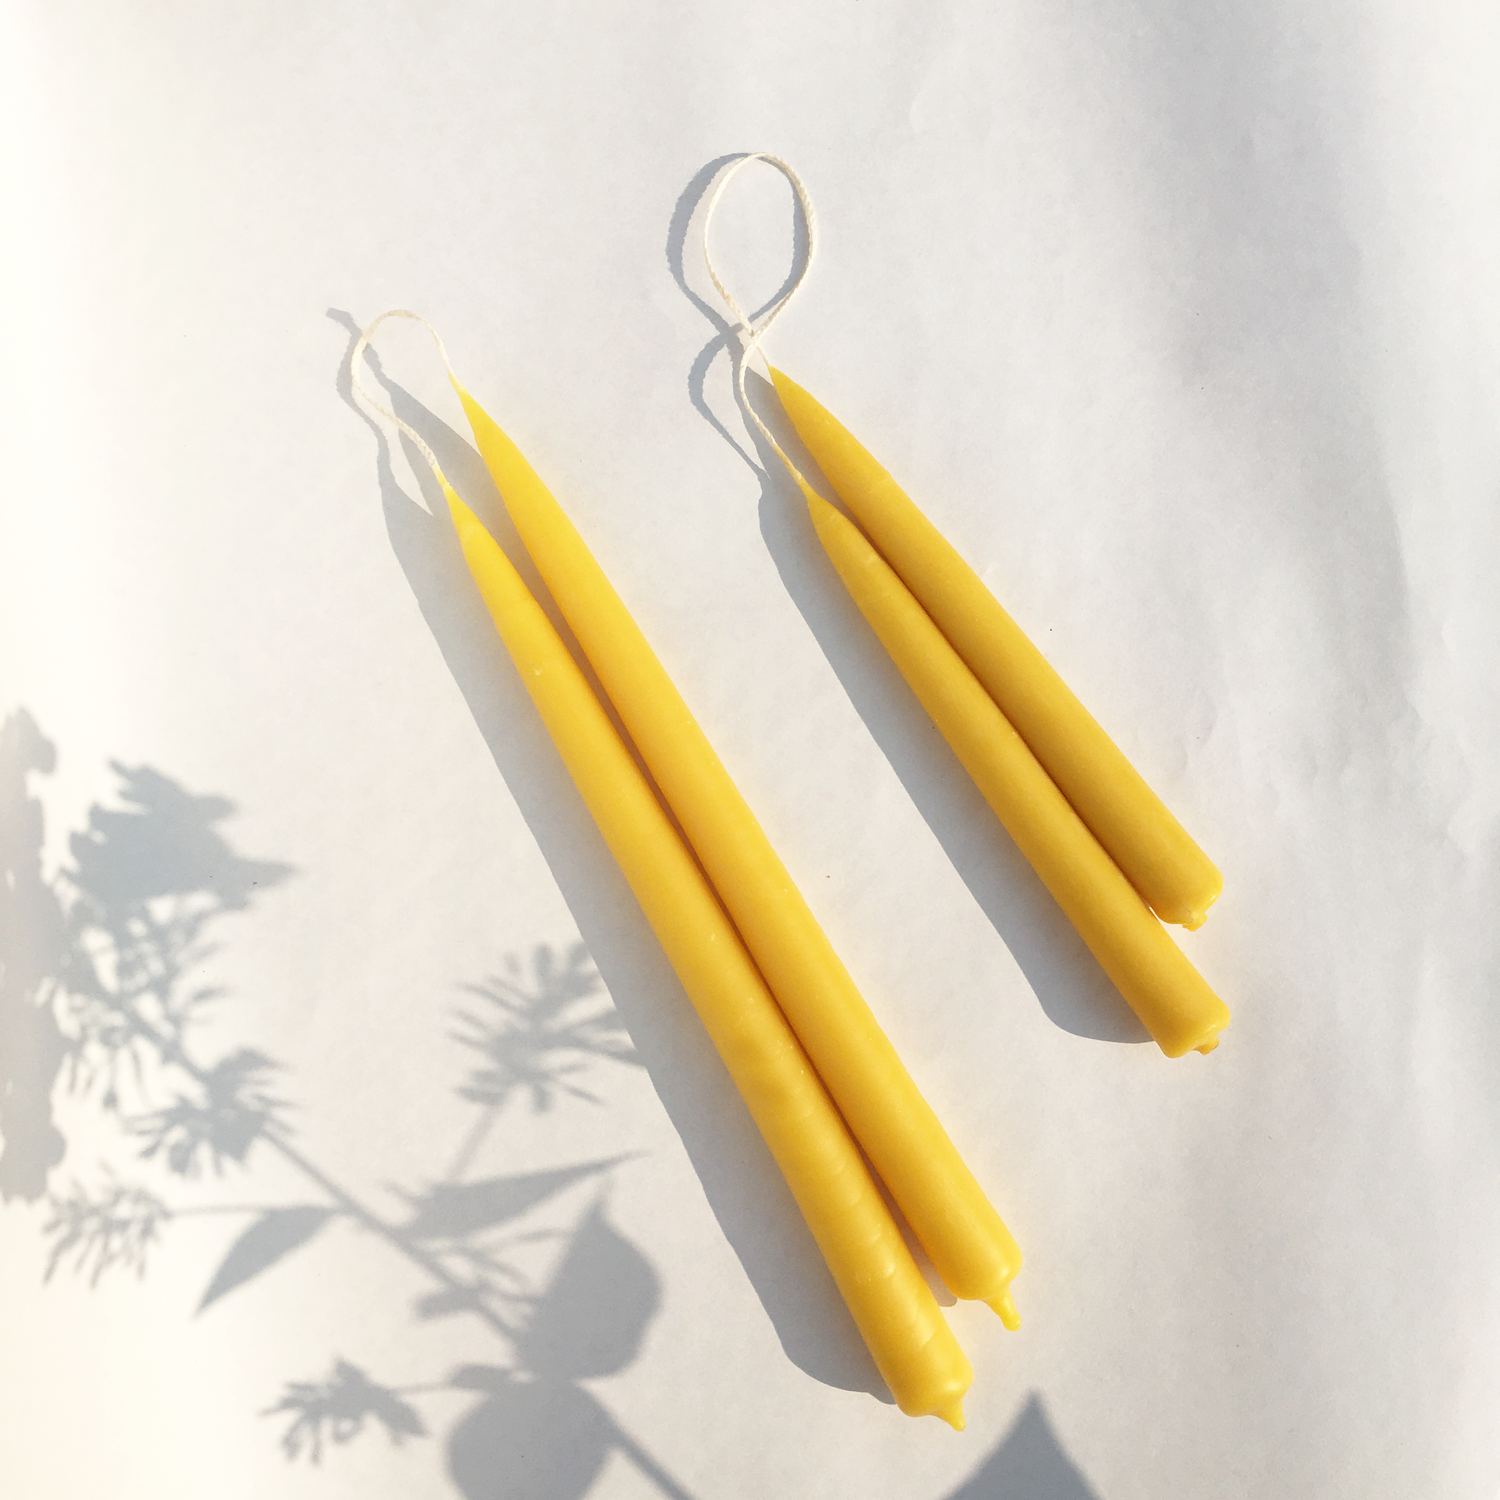 Hand-dipped Beeswax Candles — simply living well